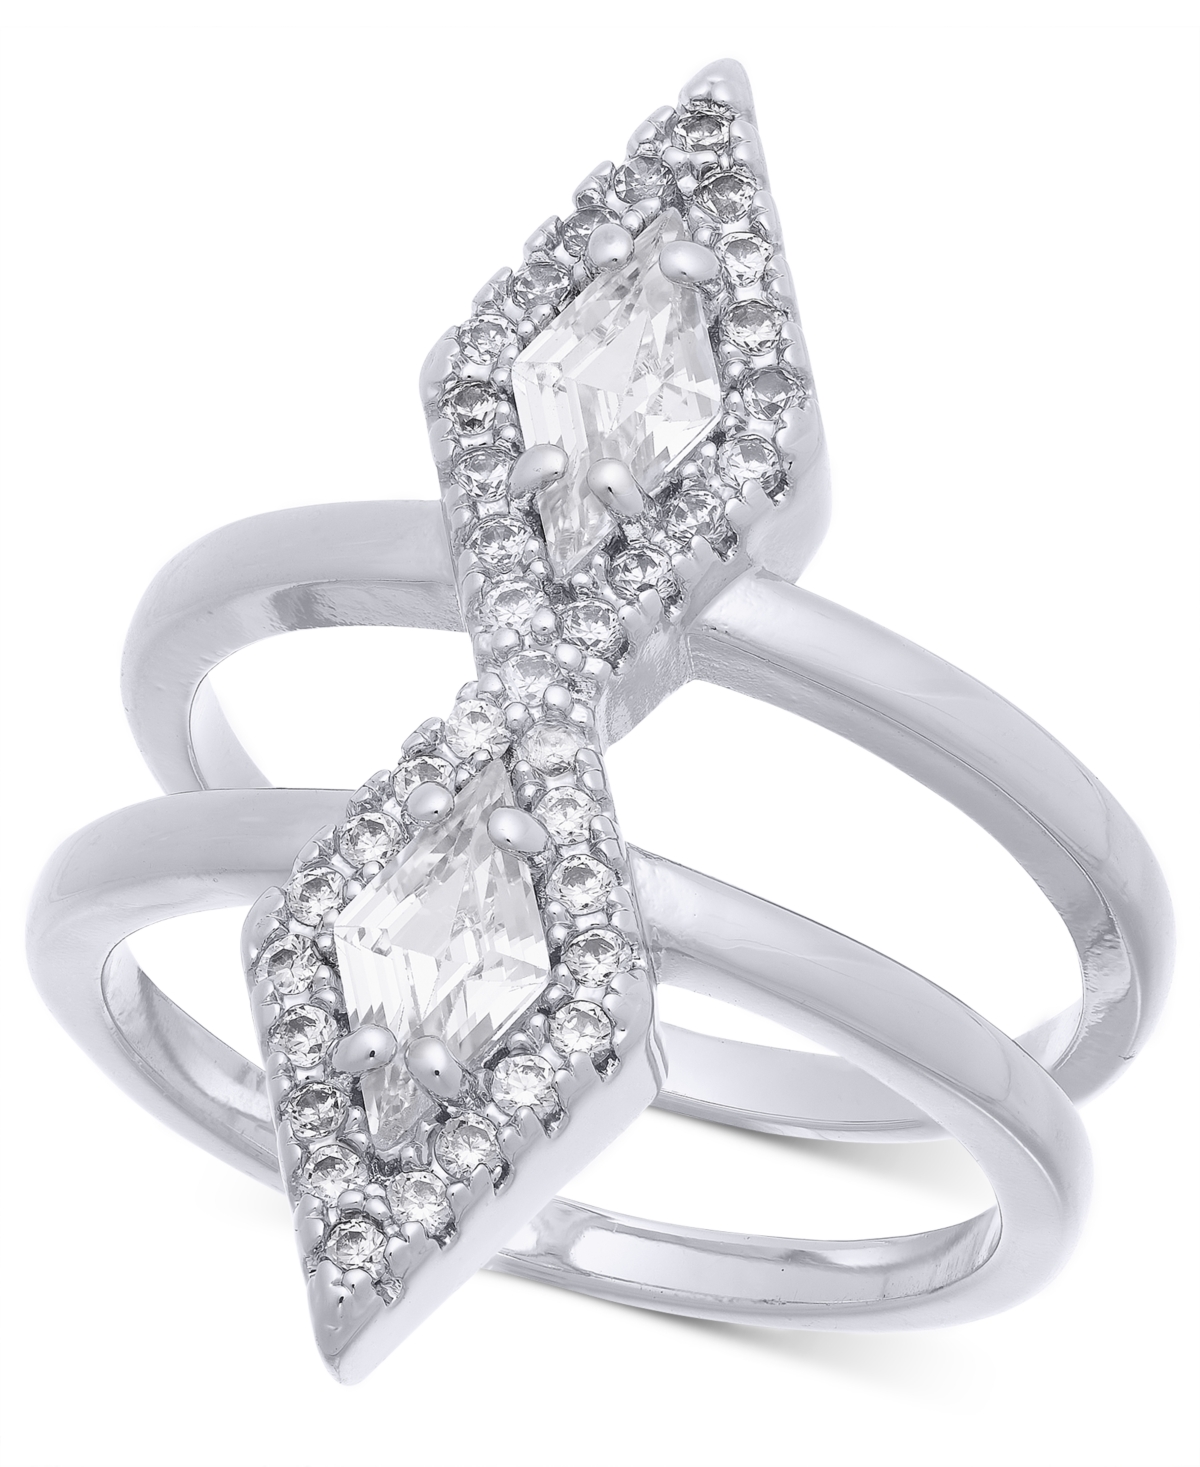 Silver-Tone Cubic Zirconia Triangle Double Row Ring, Created for Macy's - Silver